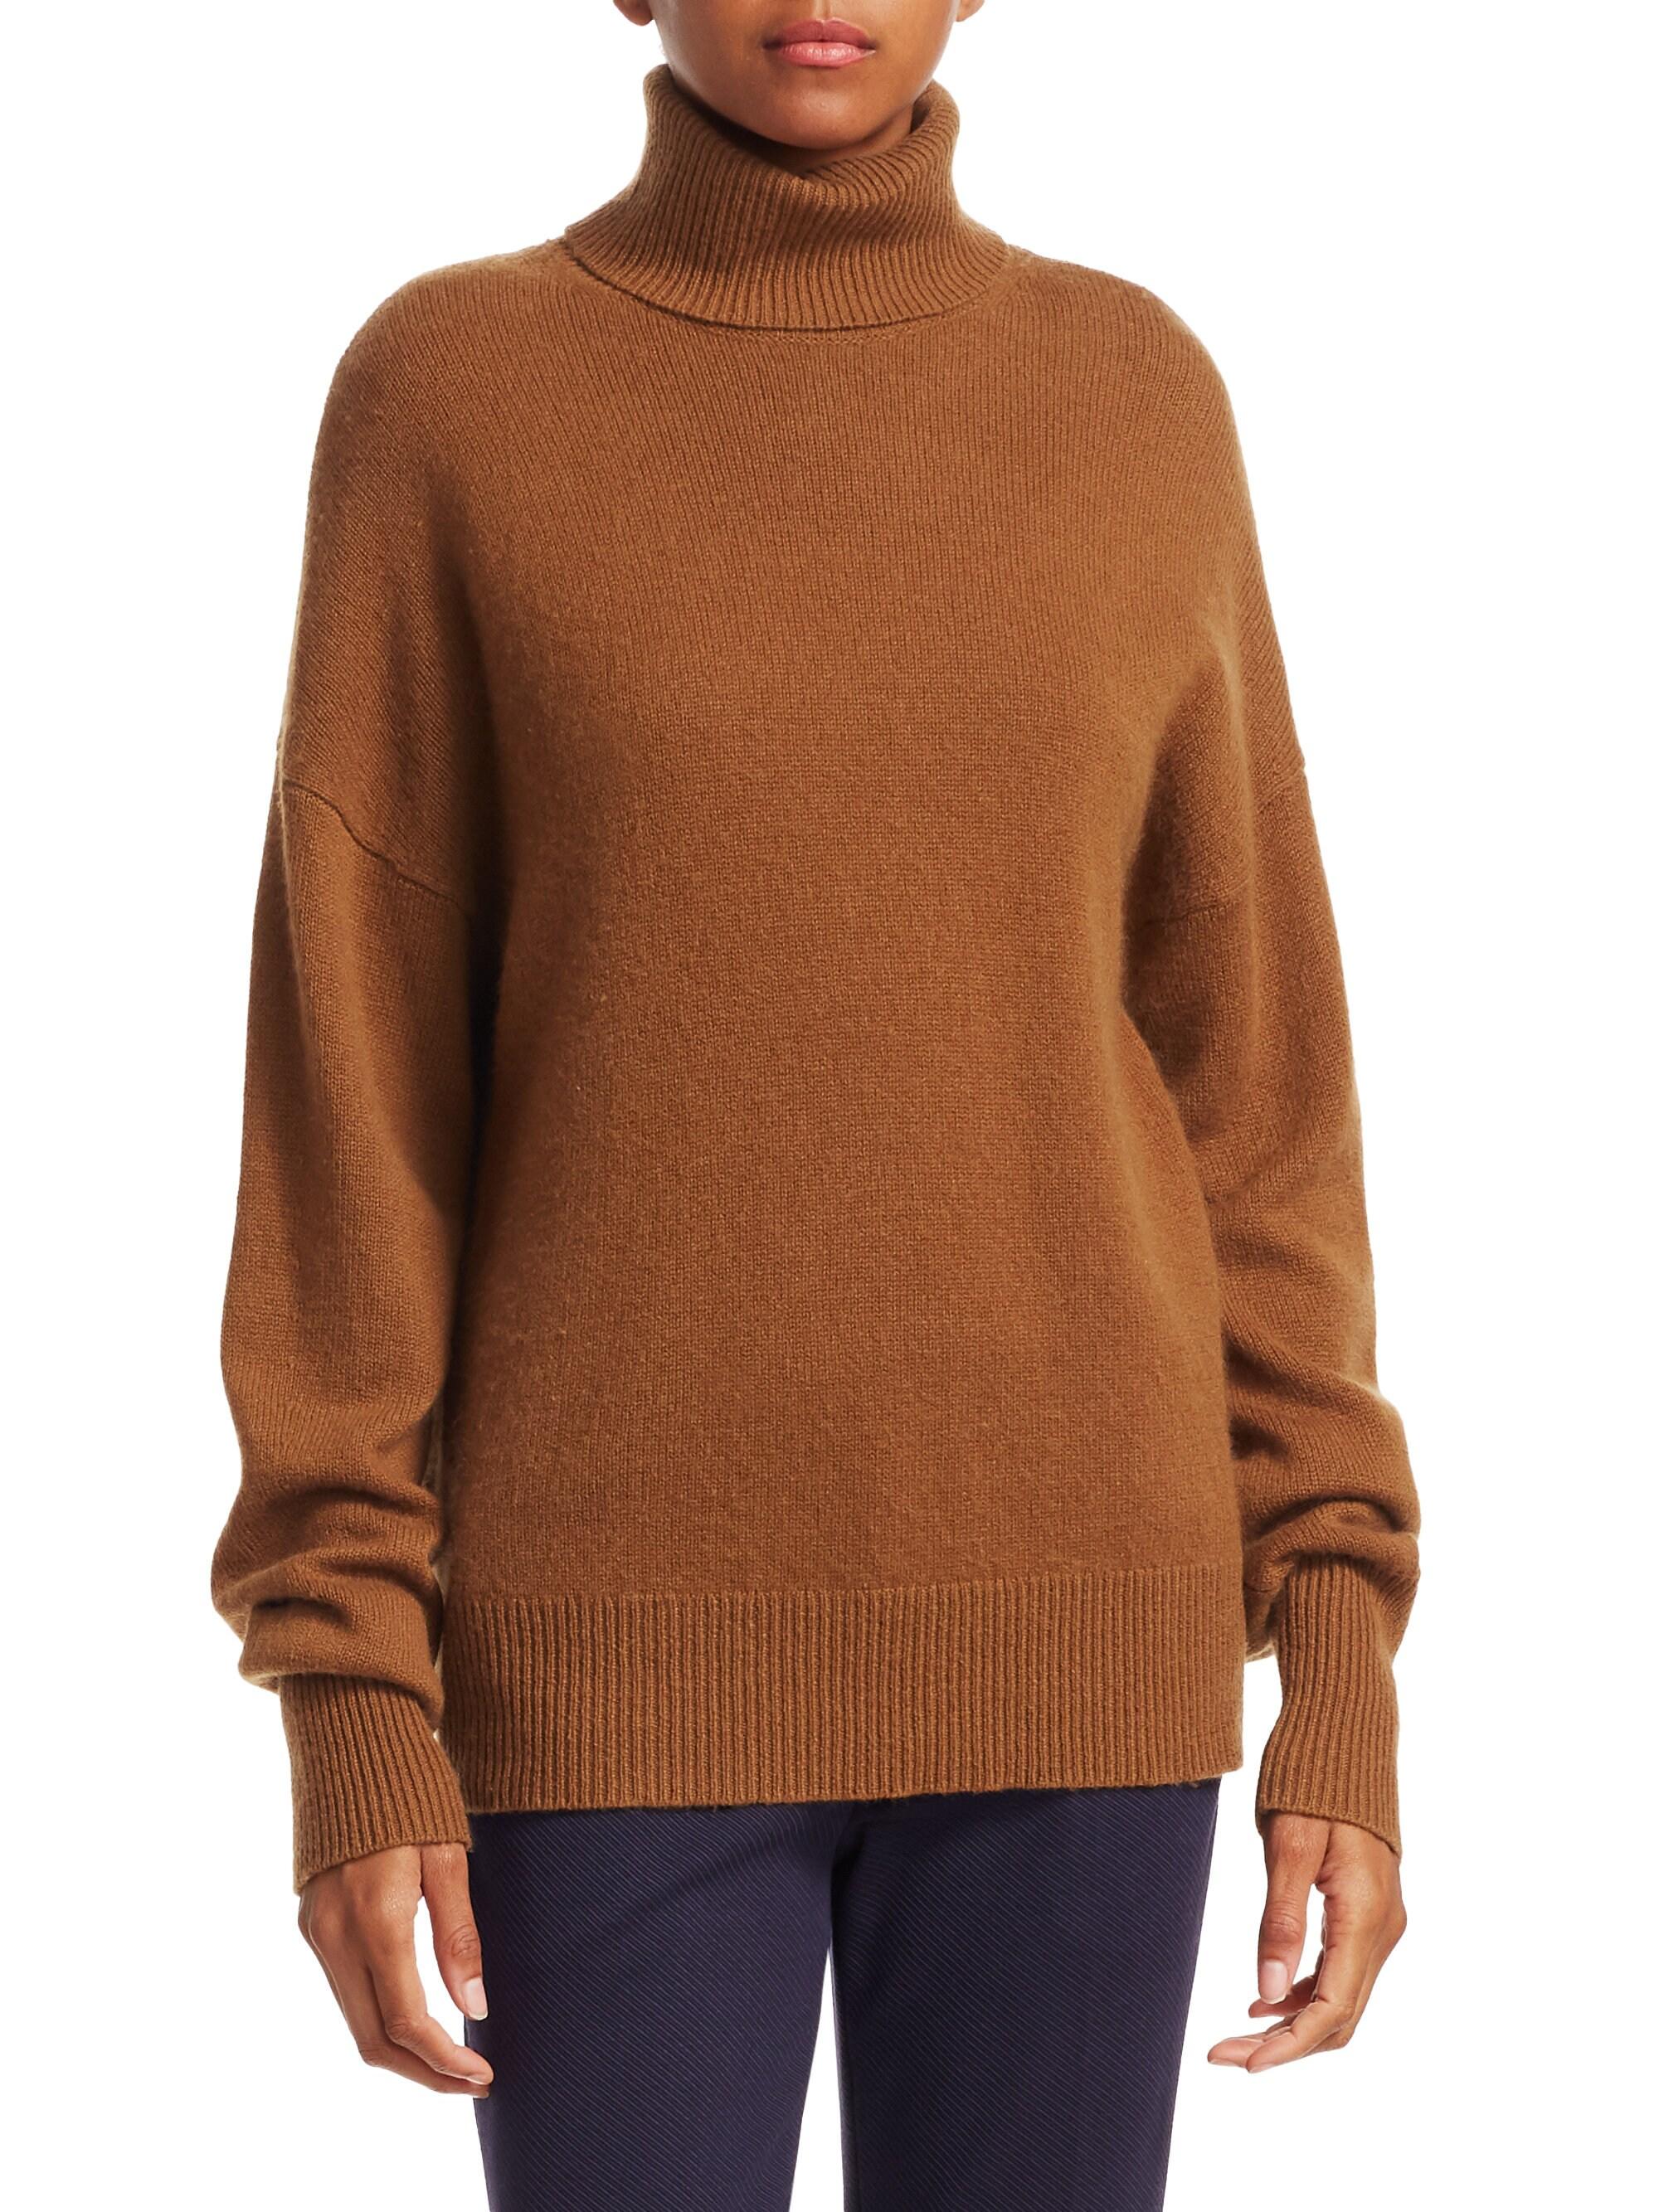 Theory Cashmere Turtleneck Sweater in Caramel (Brown) - Lyst